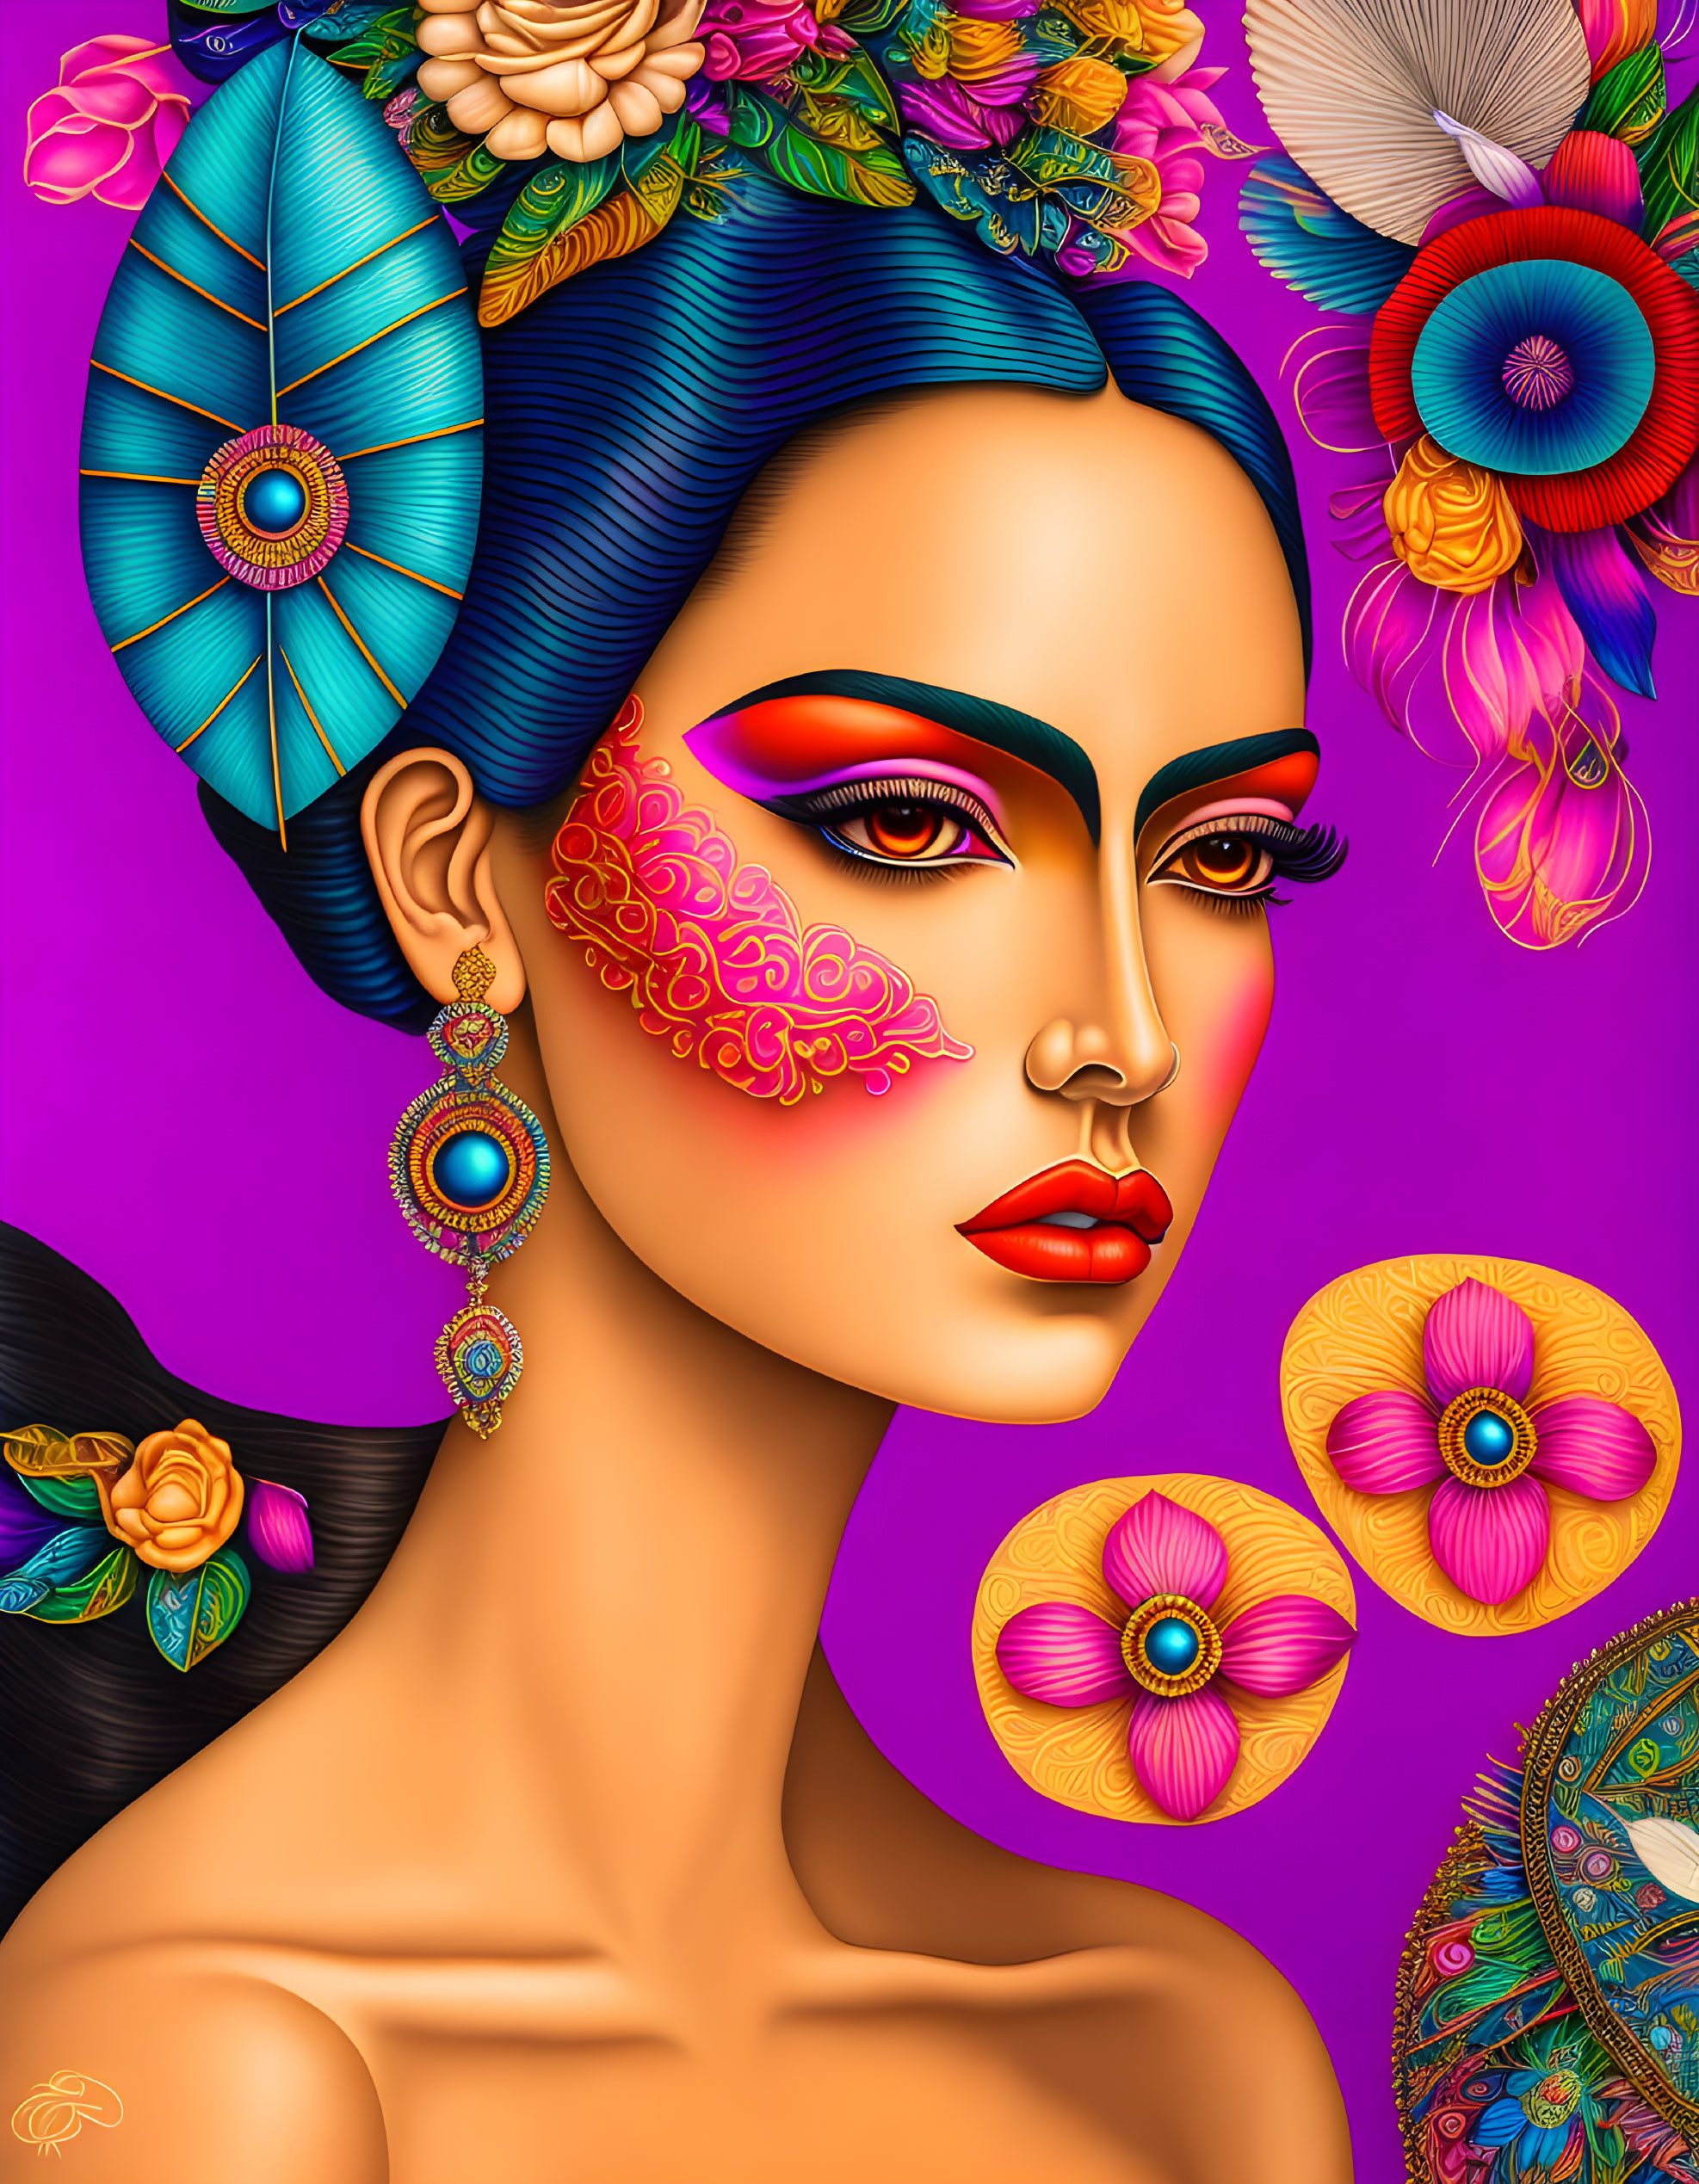 Colorful digital artwork: Woman with floral headpiece, bold makeup, statement earrings on purple background.